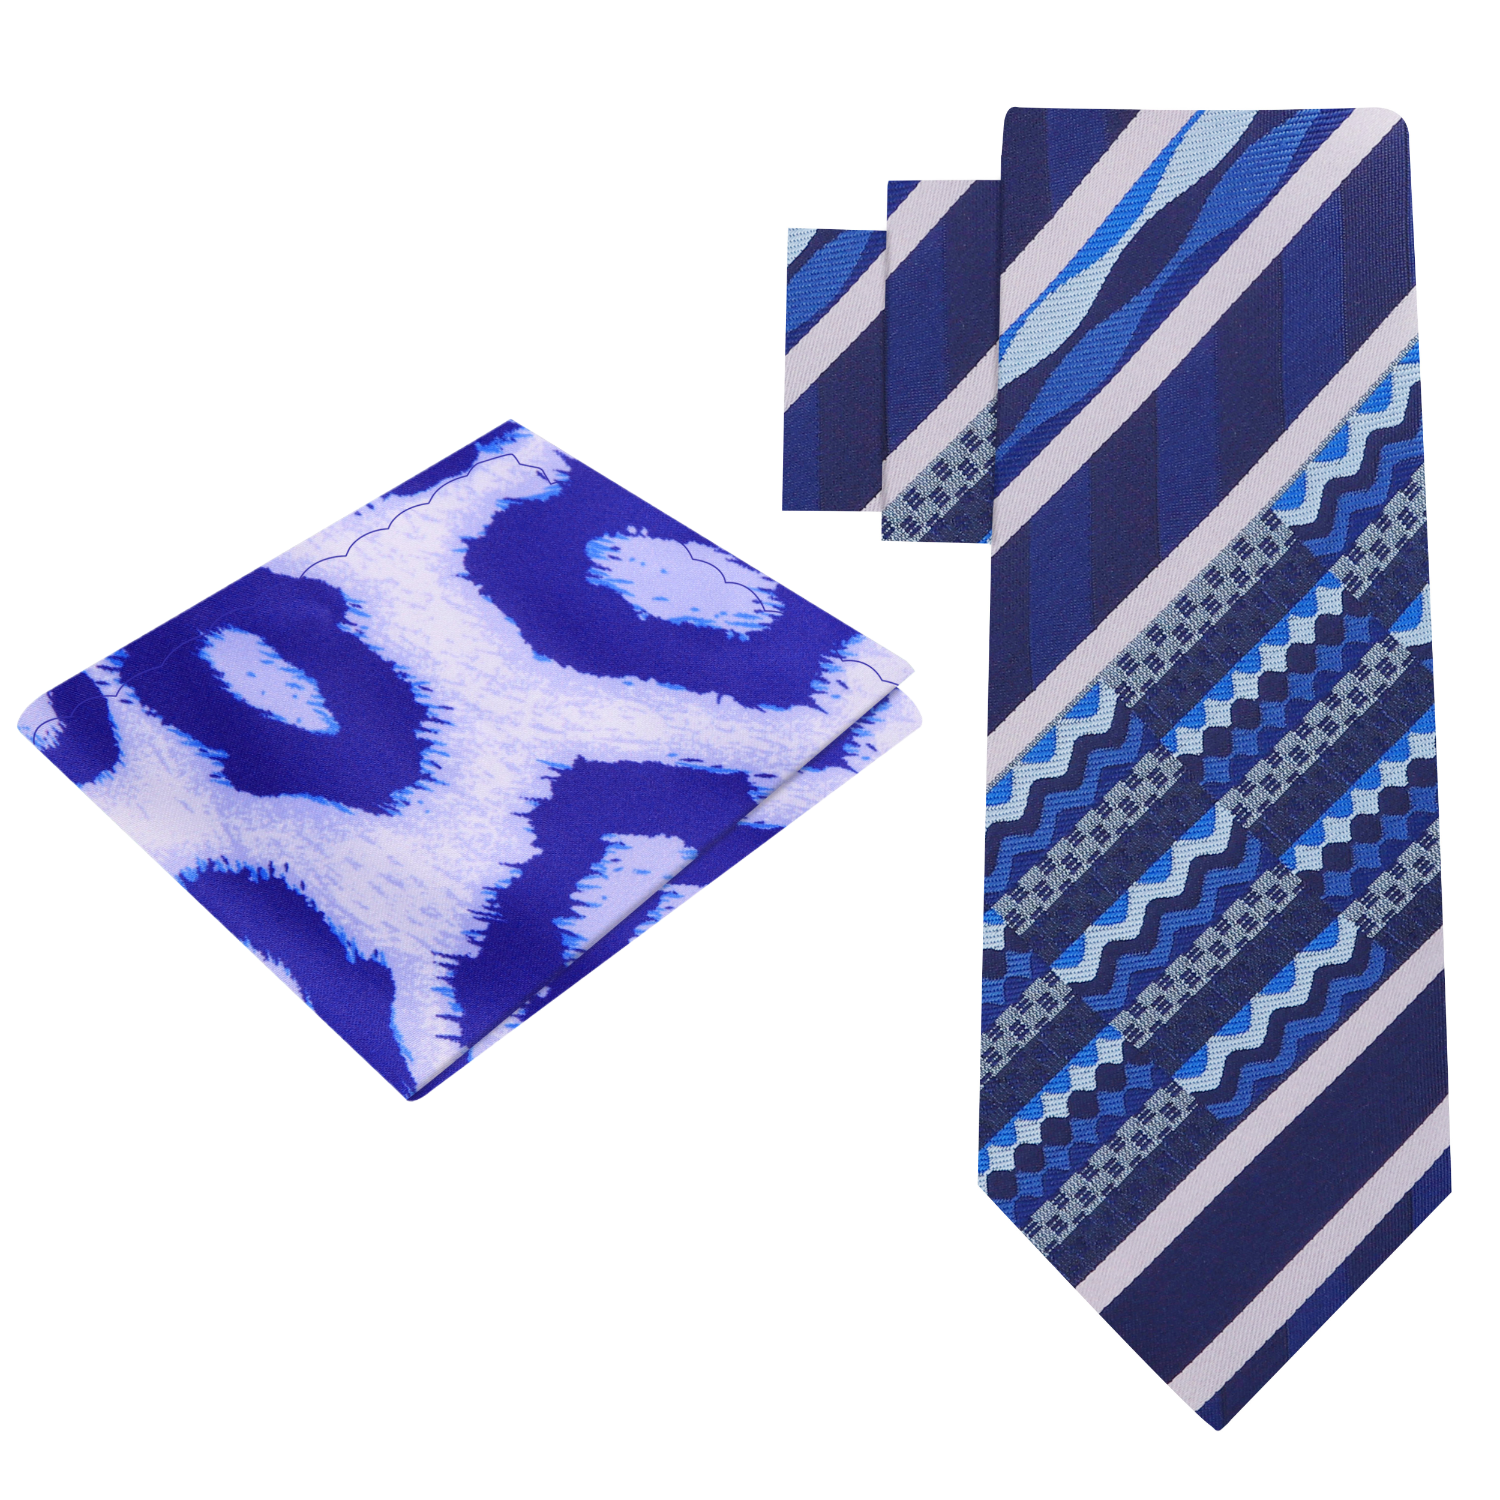 View 2 Shades of Blue Tribe Called Class Necktie and Square